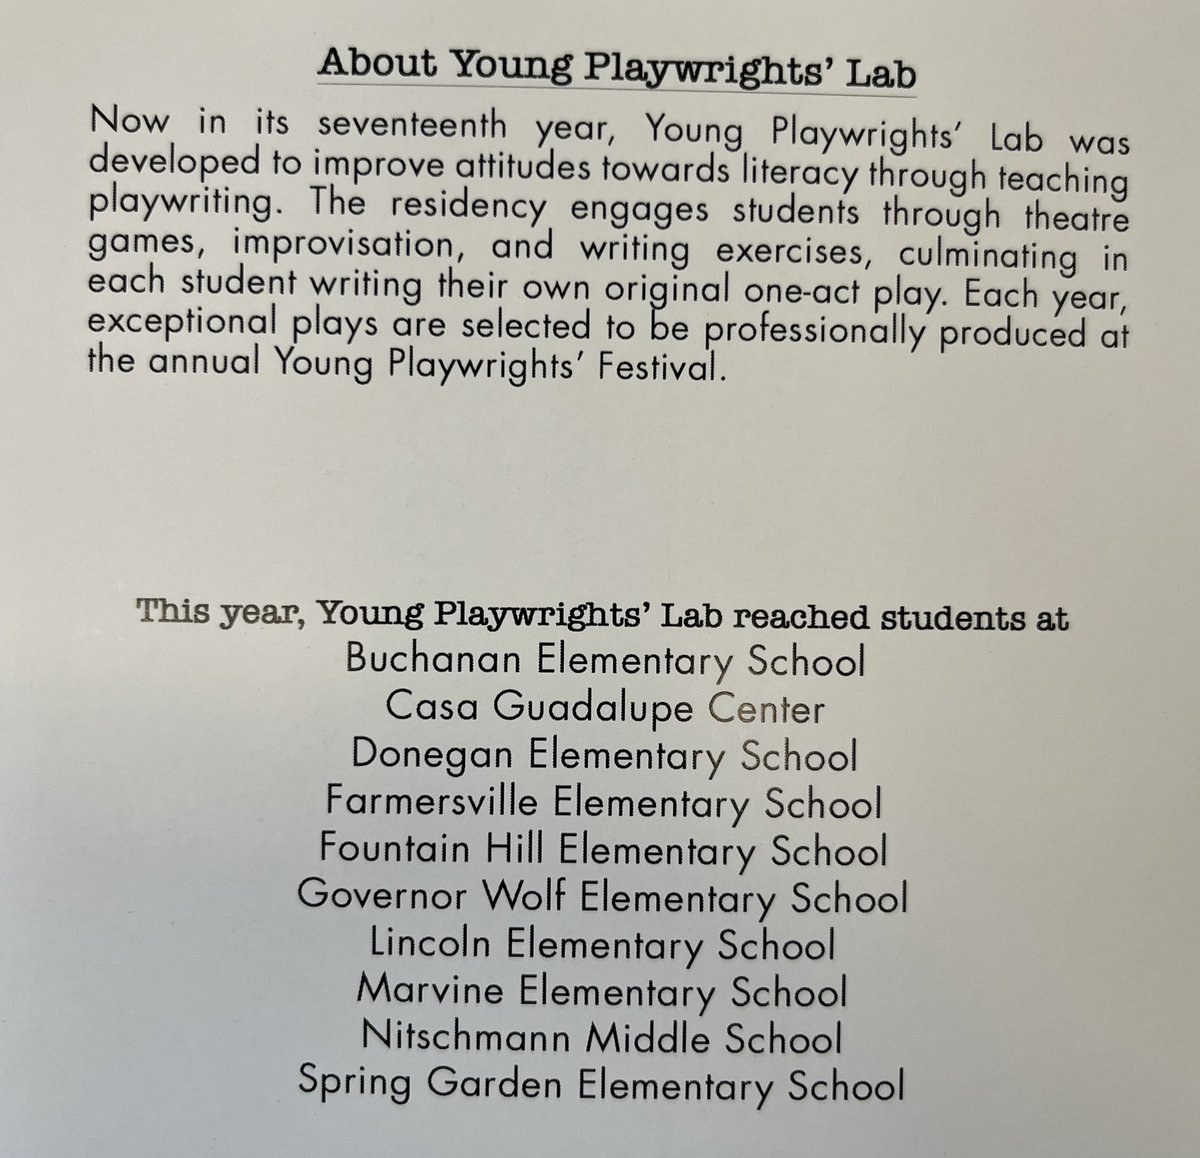 Looking forward to seeing 9 plays written by @BethlehemAreaSD students and performed at @TstoneTheatre’s 17th Annual Young Playwrights’ Festival on May 21. #BuildingBethlehem #AnyGivenChildBethlehem